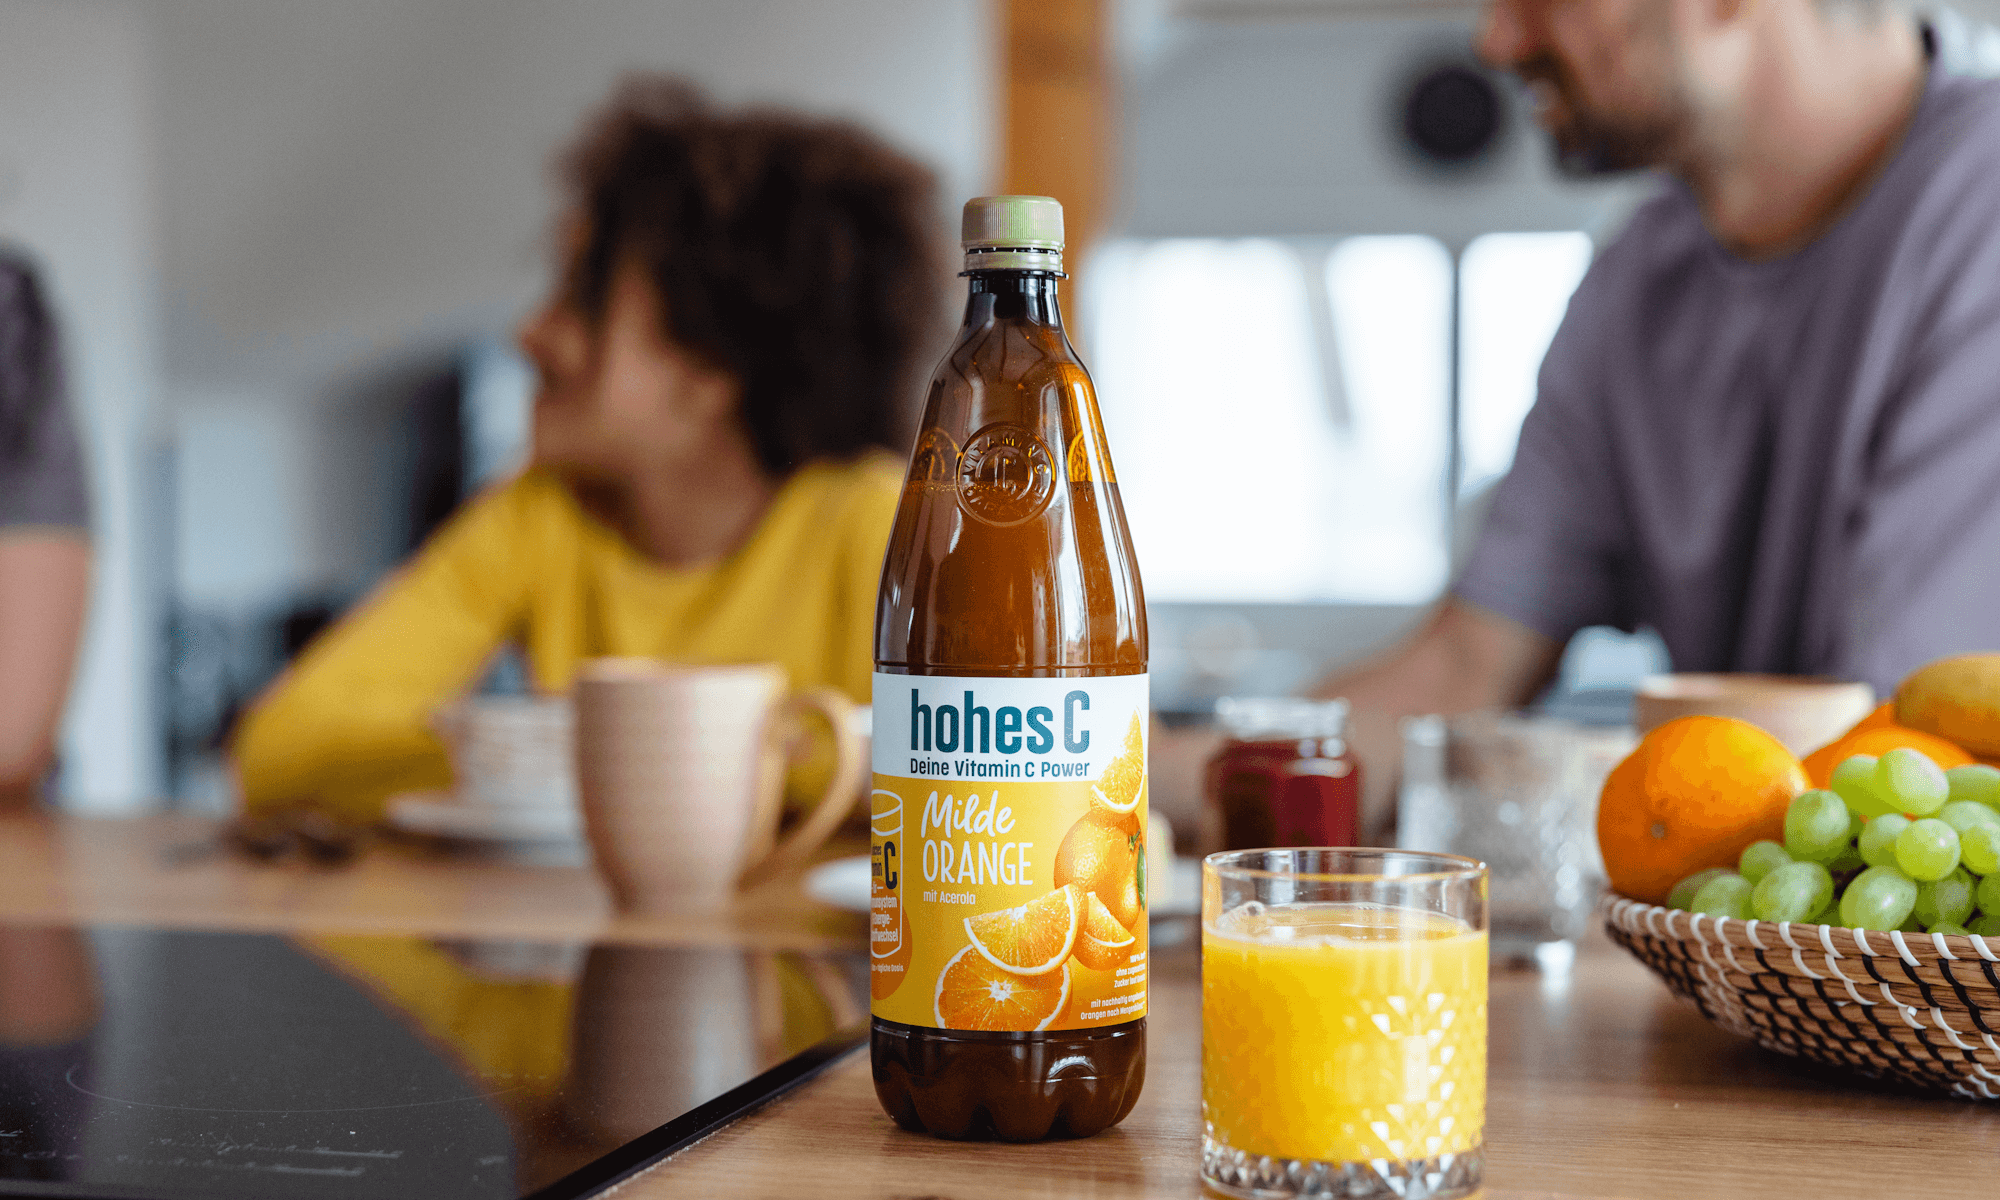 Eckes-Granini Use Case with an image of a bottle of hohes C Milde Orange